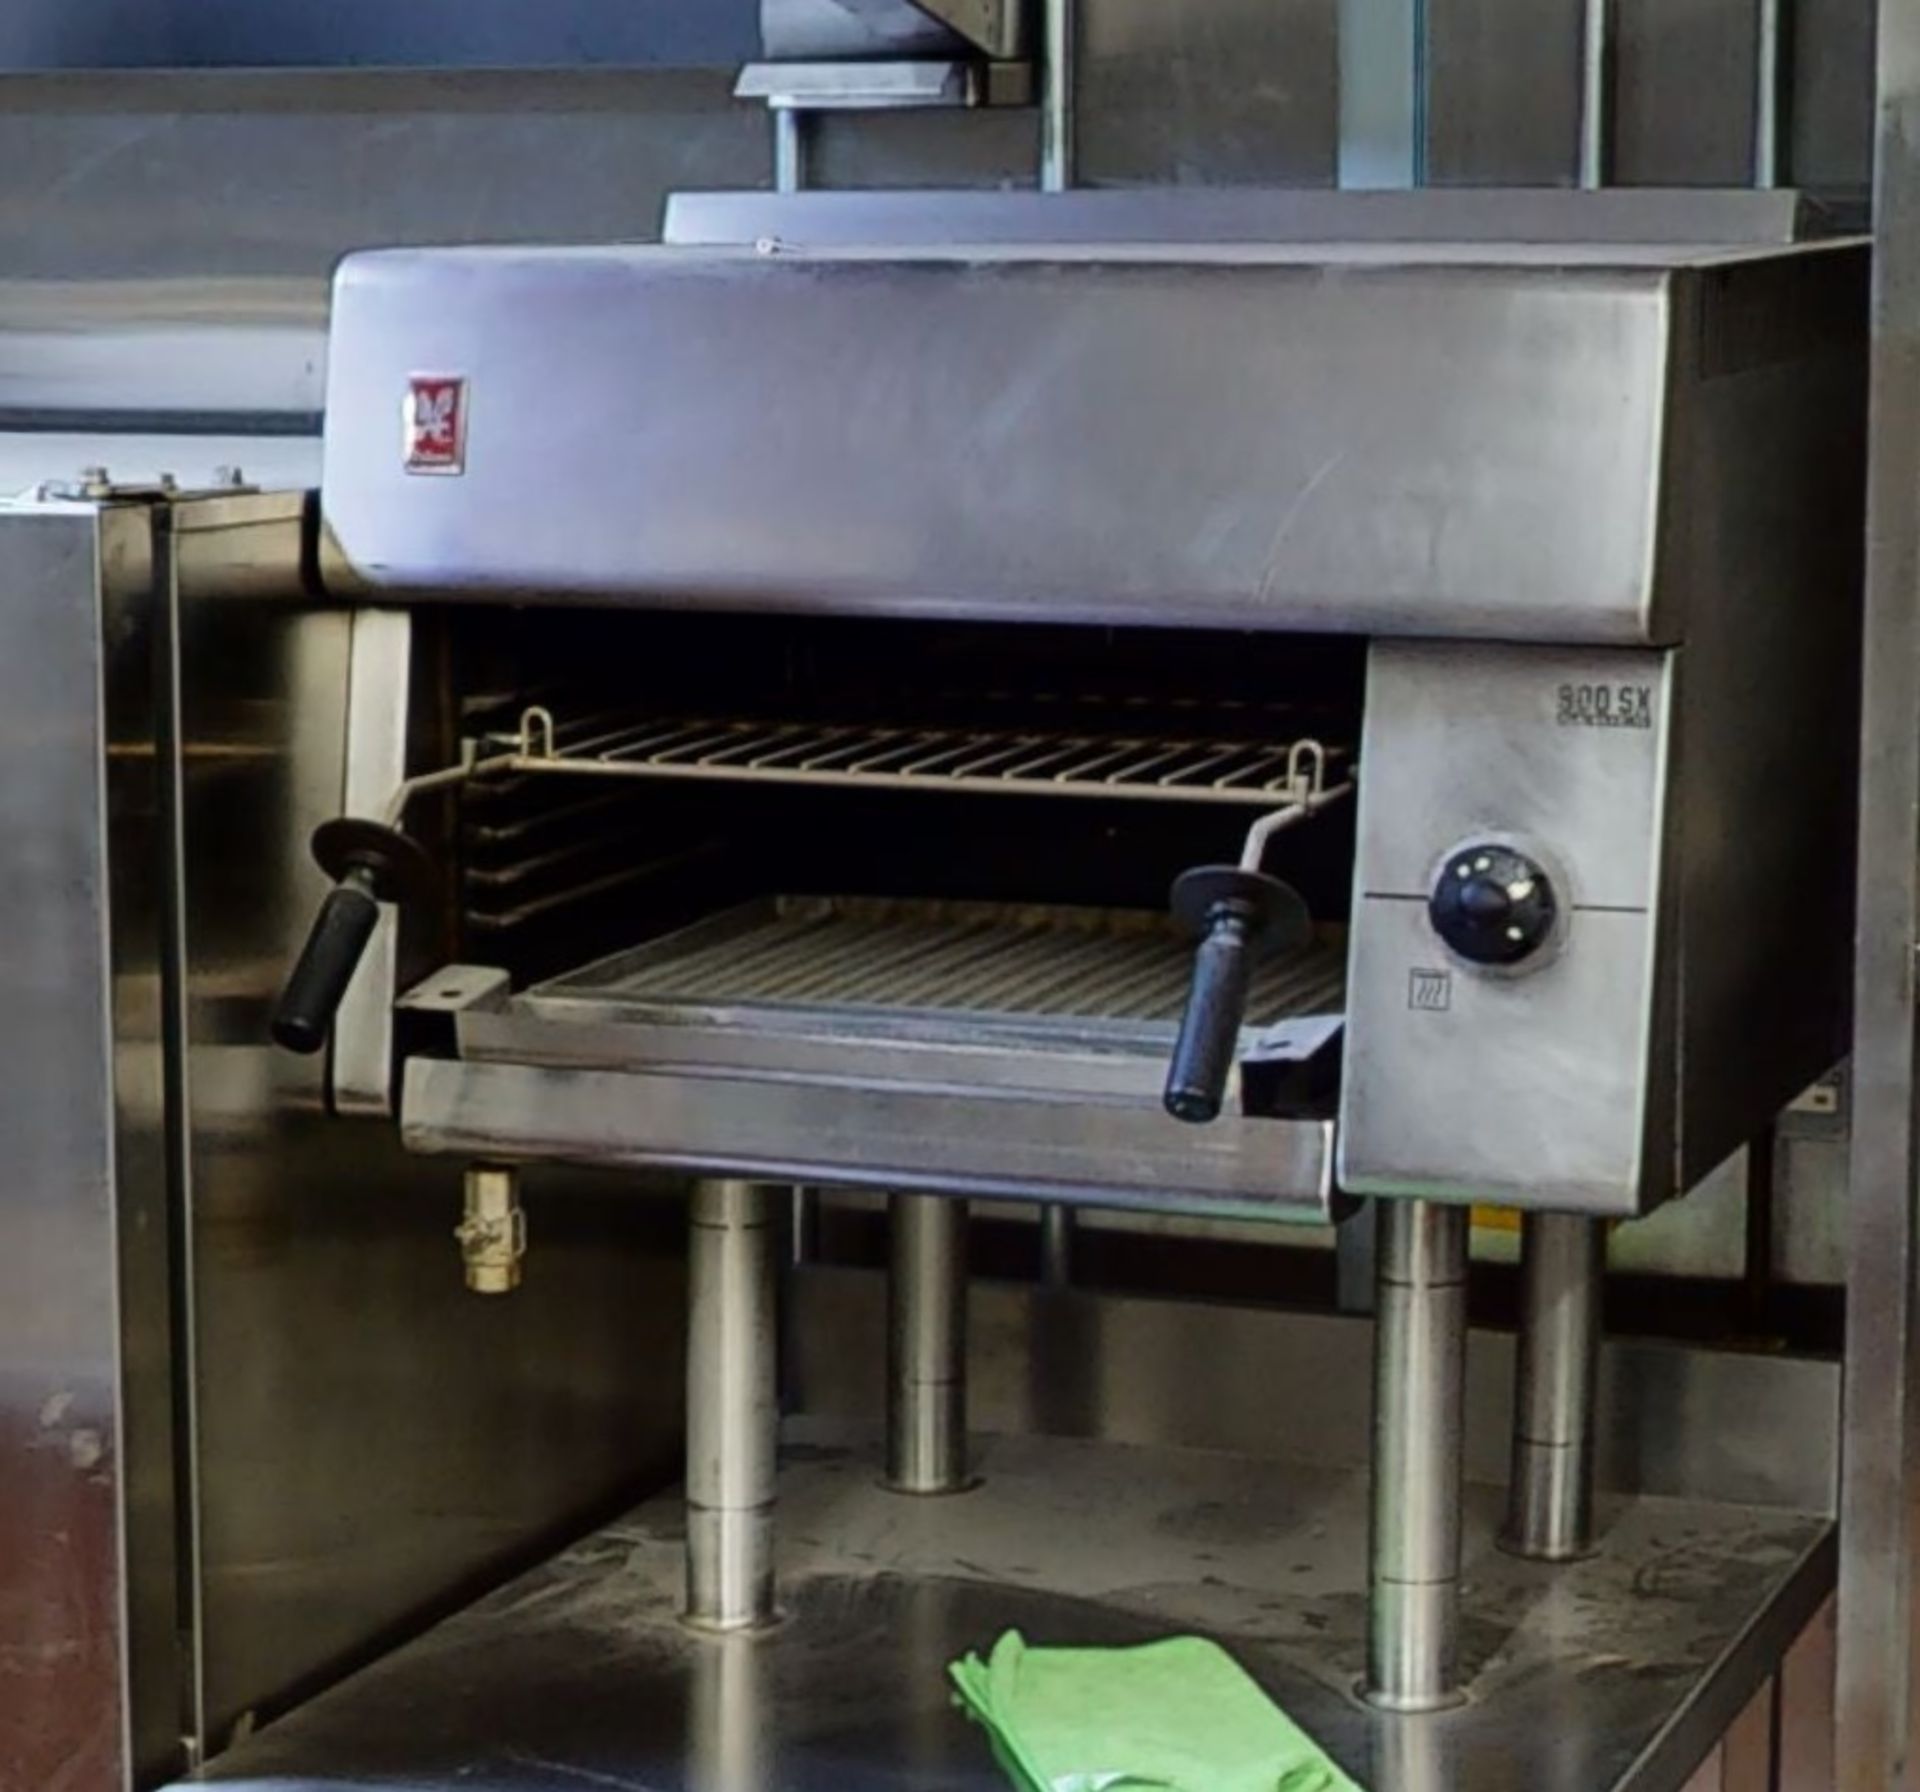 Falcon Salamander Gas Grill 900 Sx Series On Stainless Steel Mounted Stand - No VAT On The - Image 3 of 5